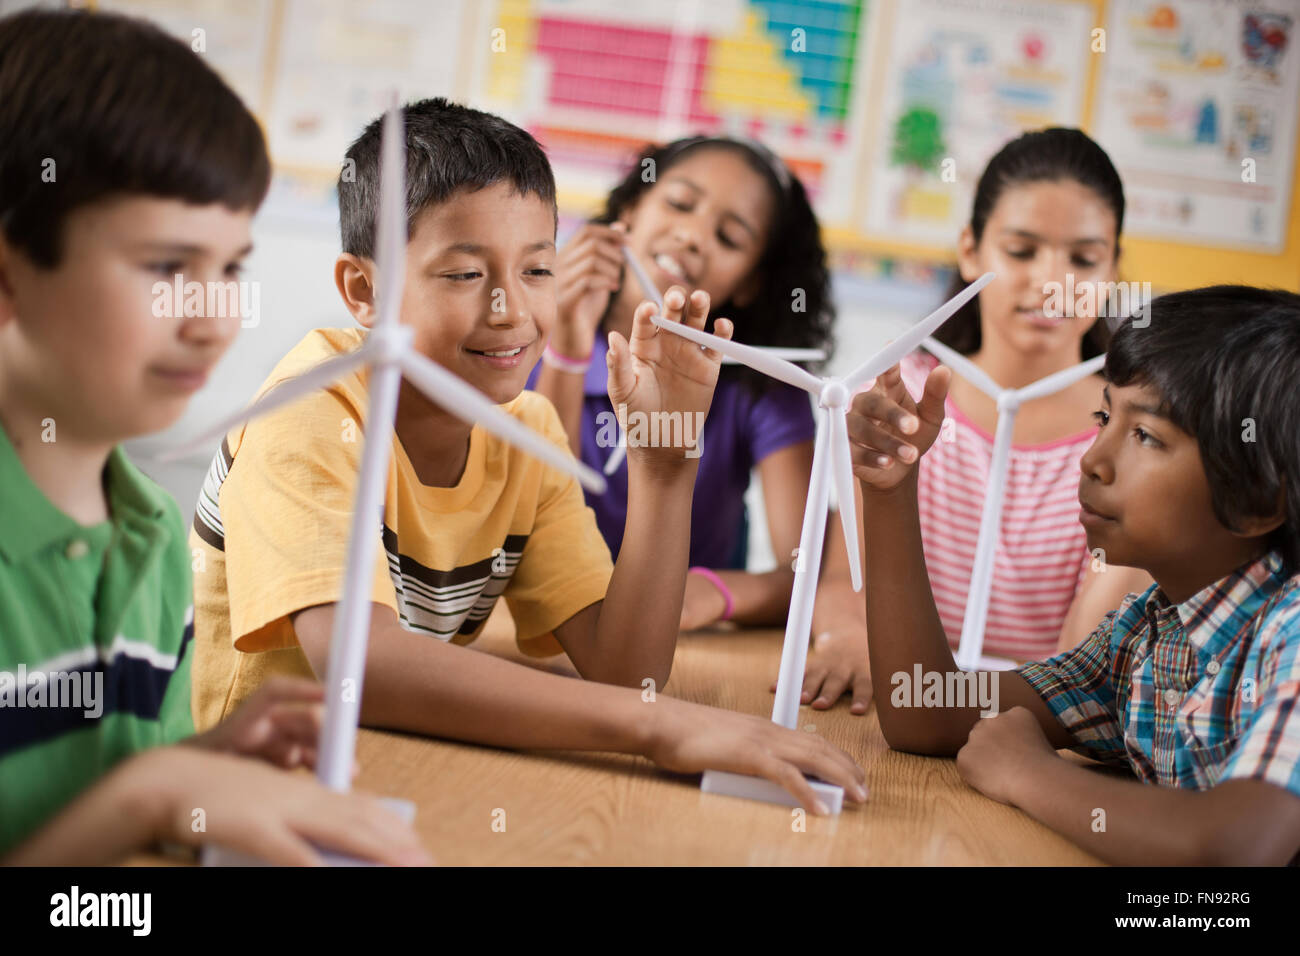 A group of young girls and boys with wind turbine models. Stock Photo